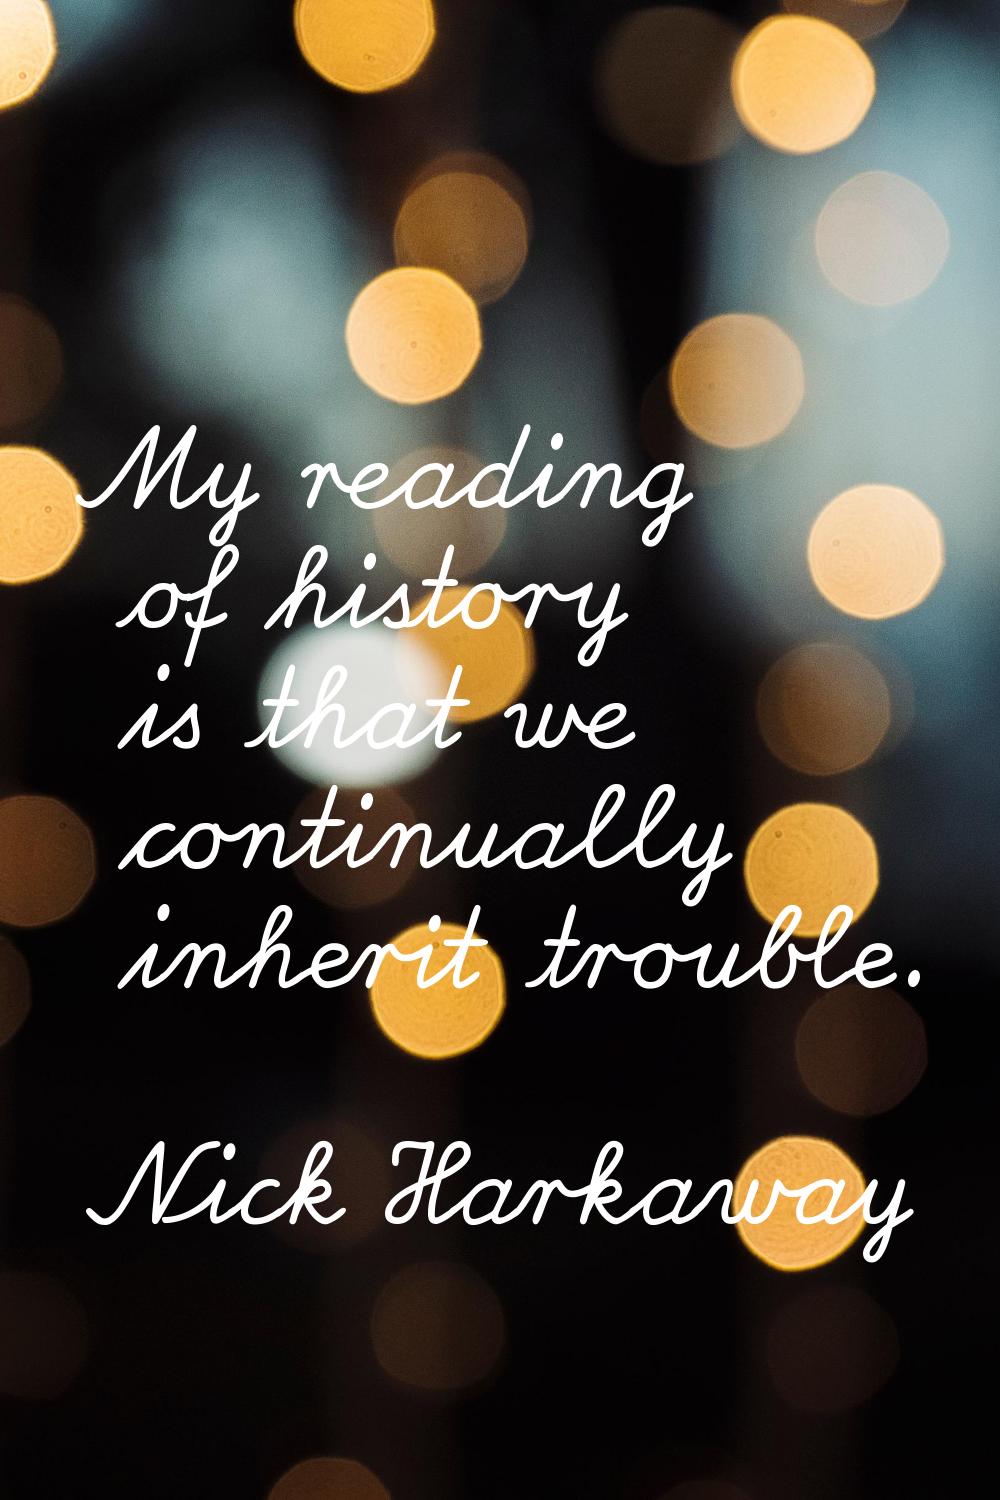 My reading of history is that we continually inherit trouble.